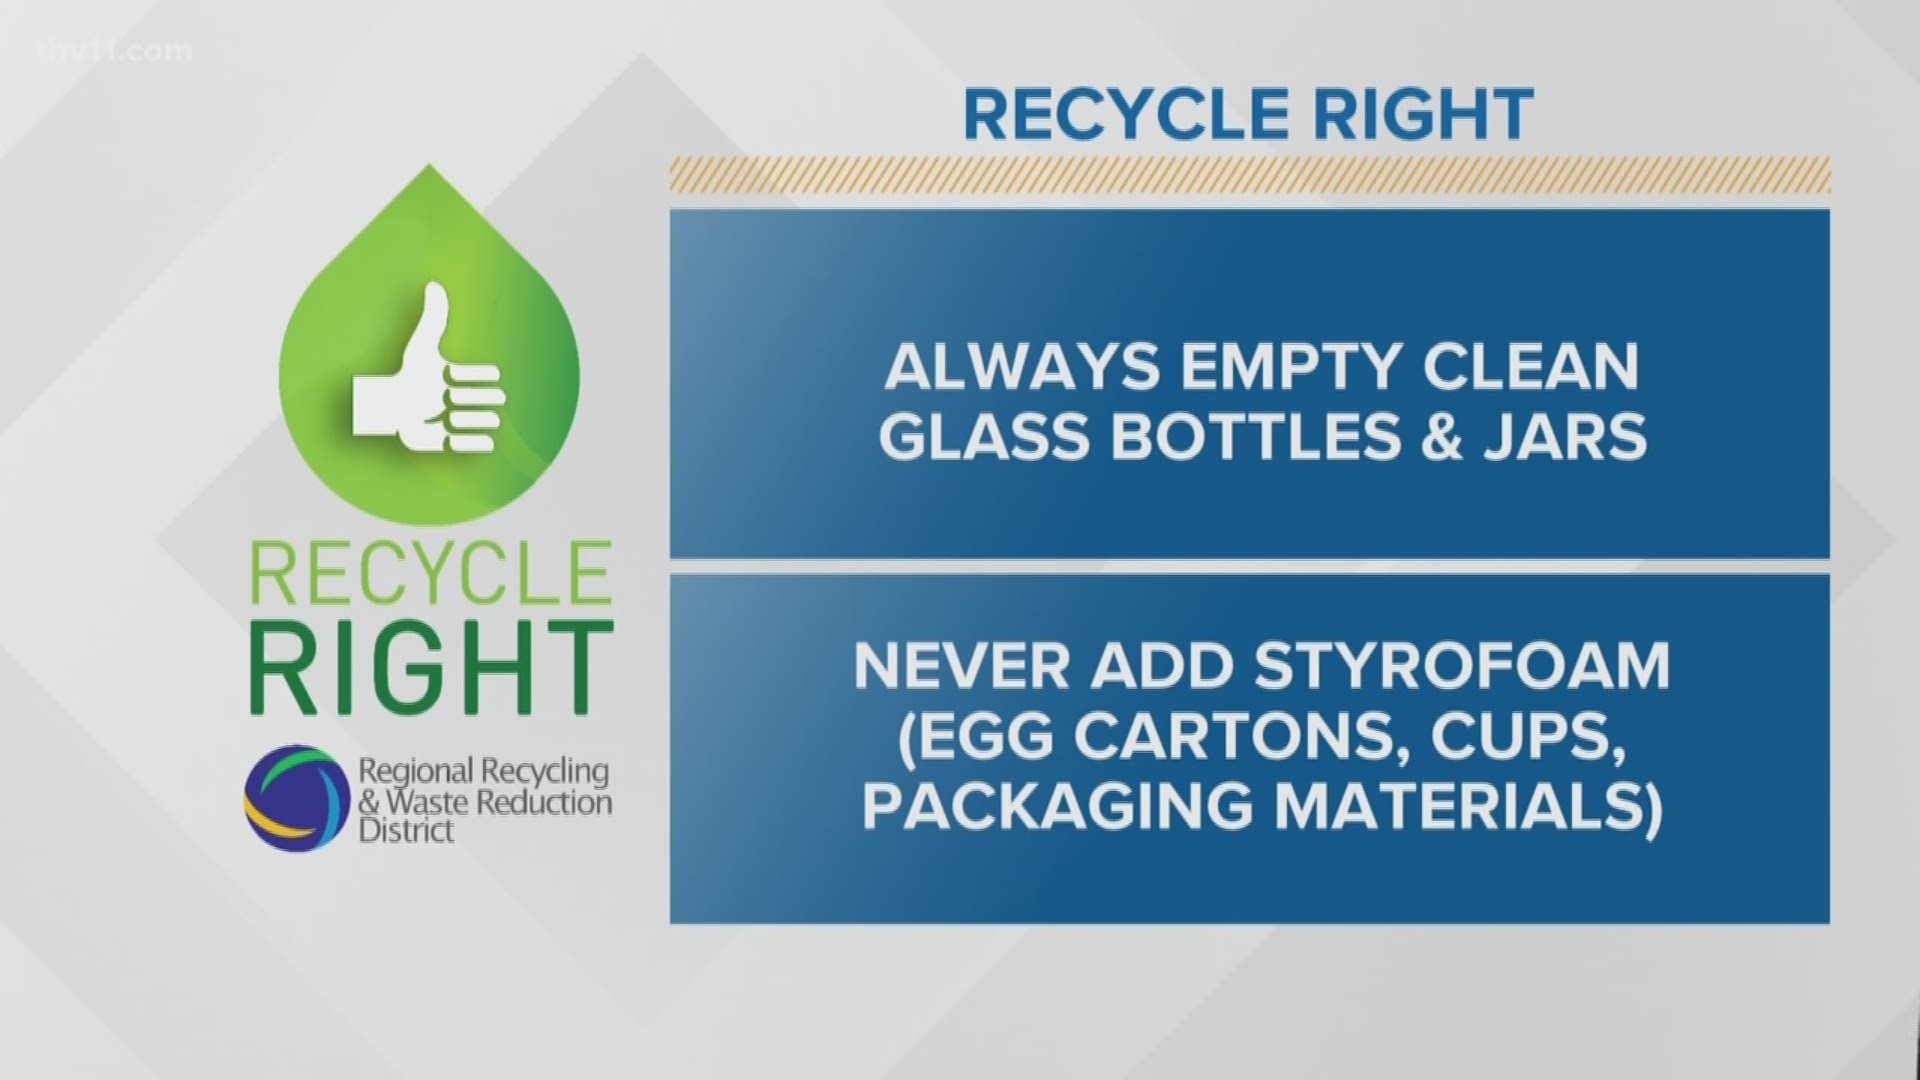 Raven Richard has your Recycle Right tip for week 32.